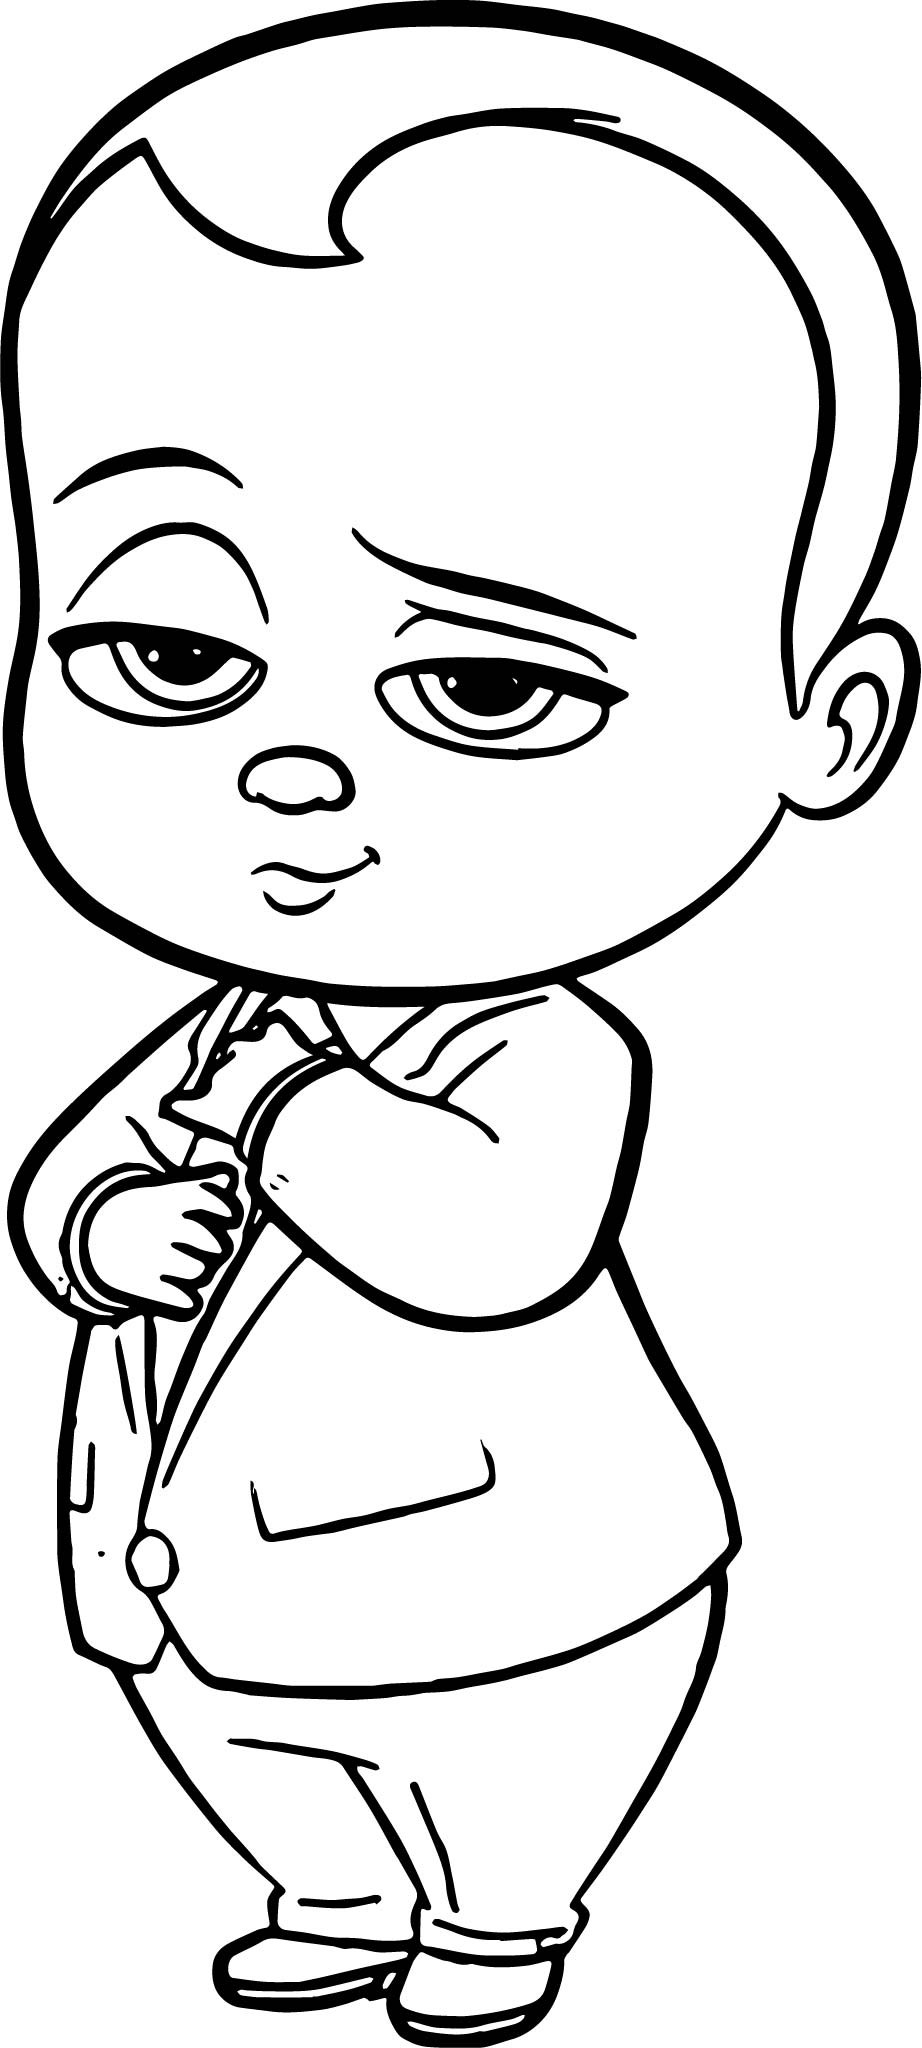 Boss Baby Coloring Page
 The Boss Baby Coloring Page